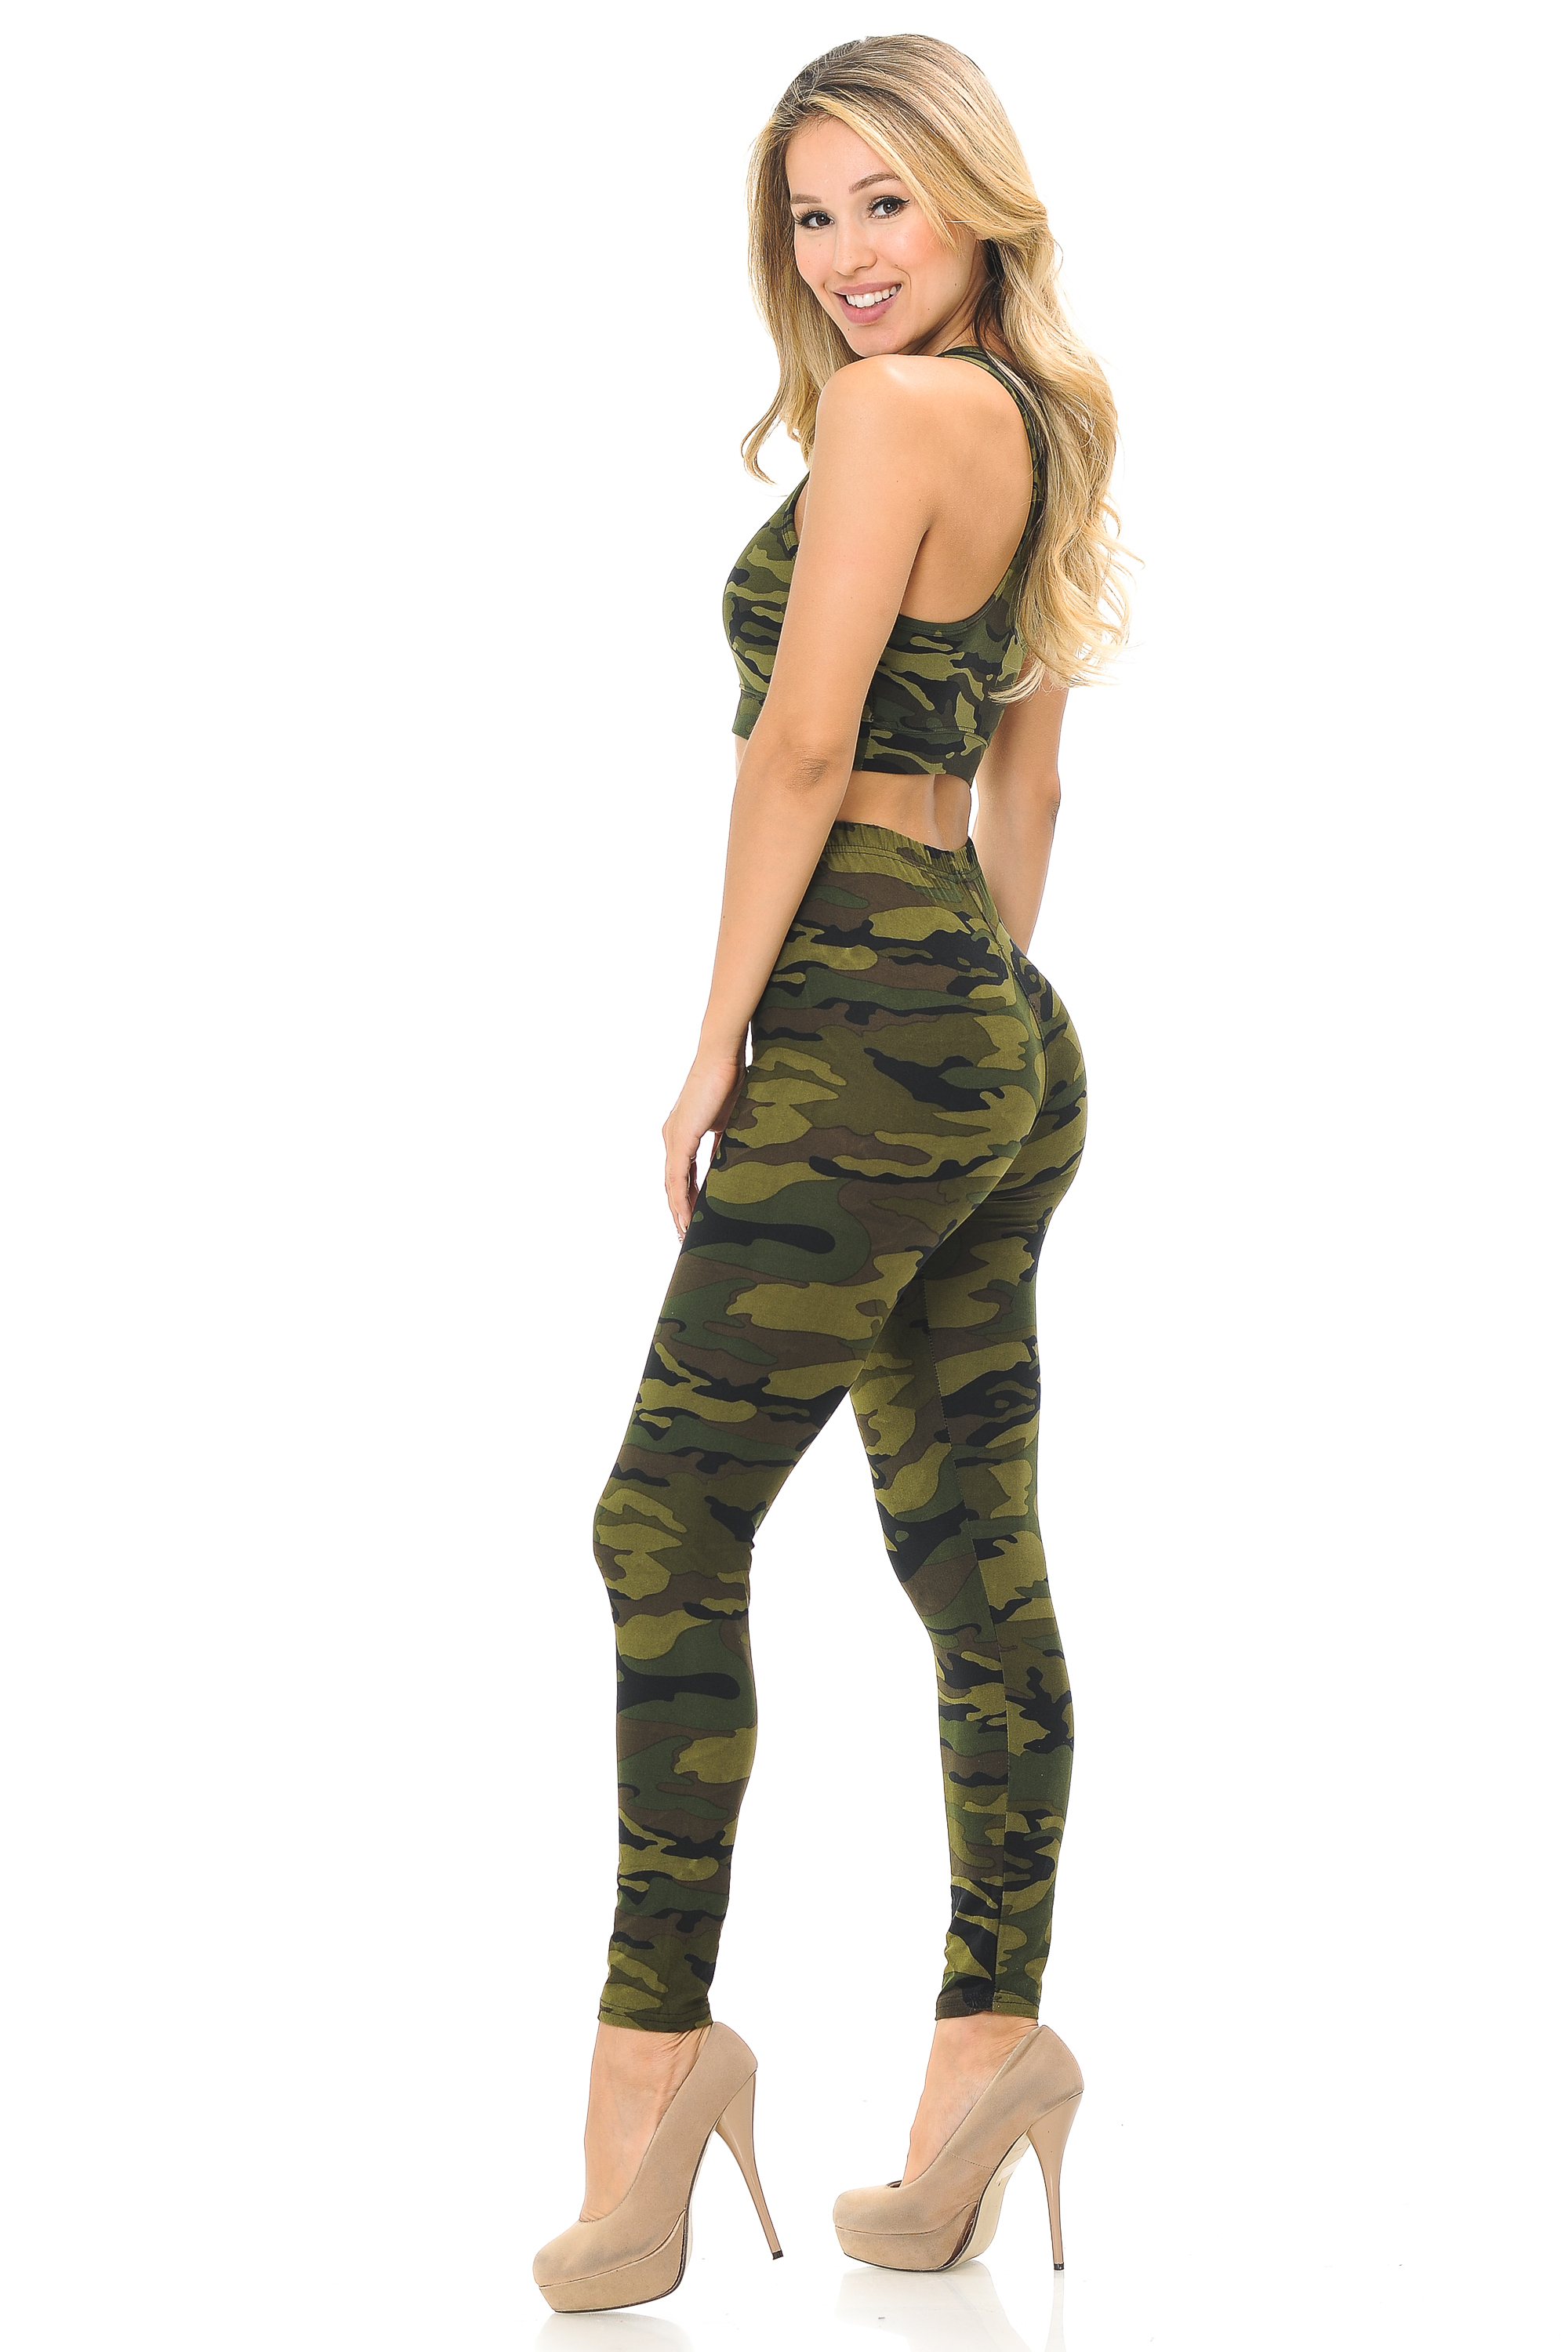 Wholesale Buttery Smooth Green Camouflage Leggings and Bra Set